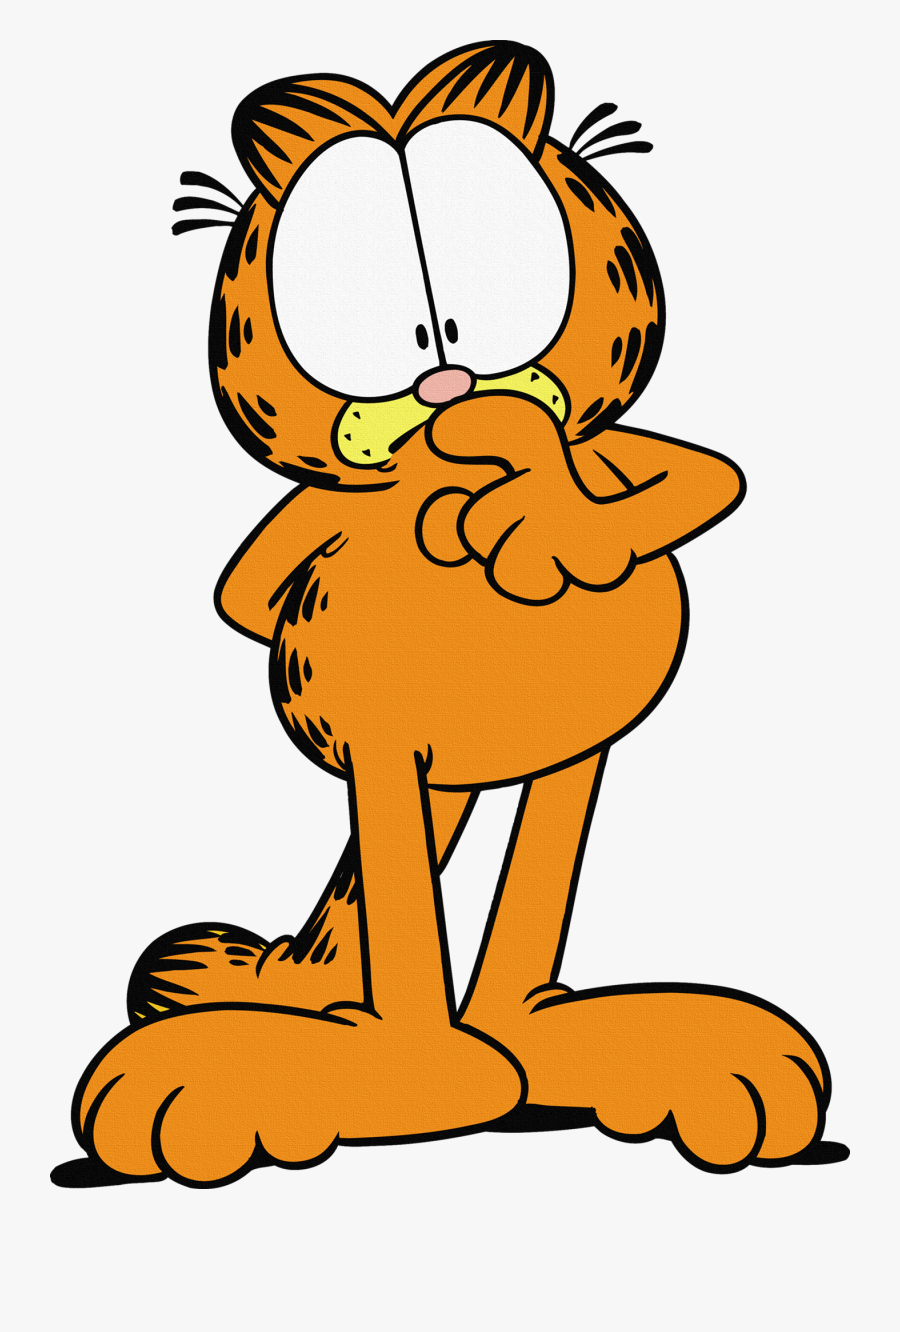 Garfield Png Free Pic - Garfield Png, Transparent Clipart